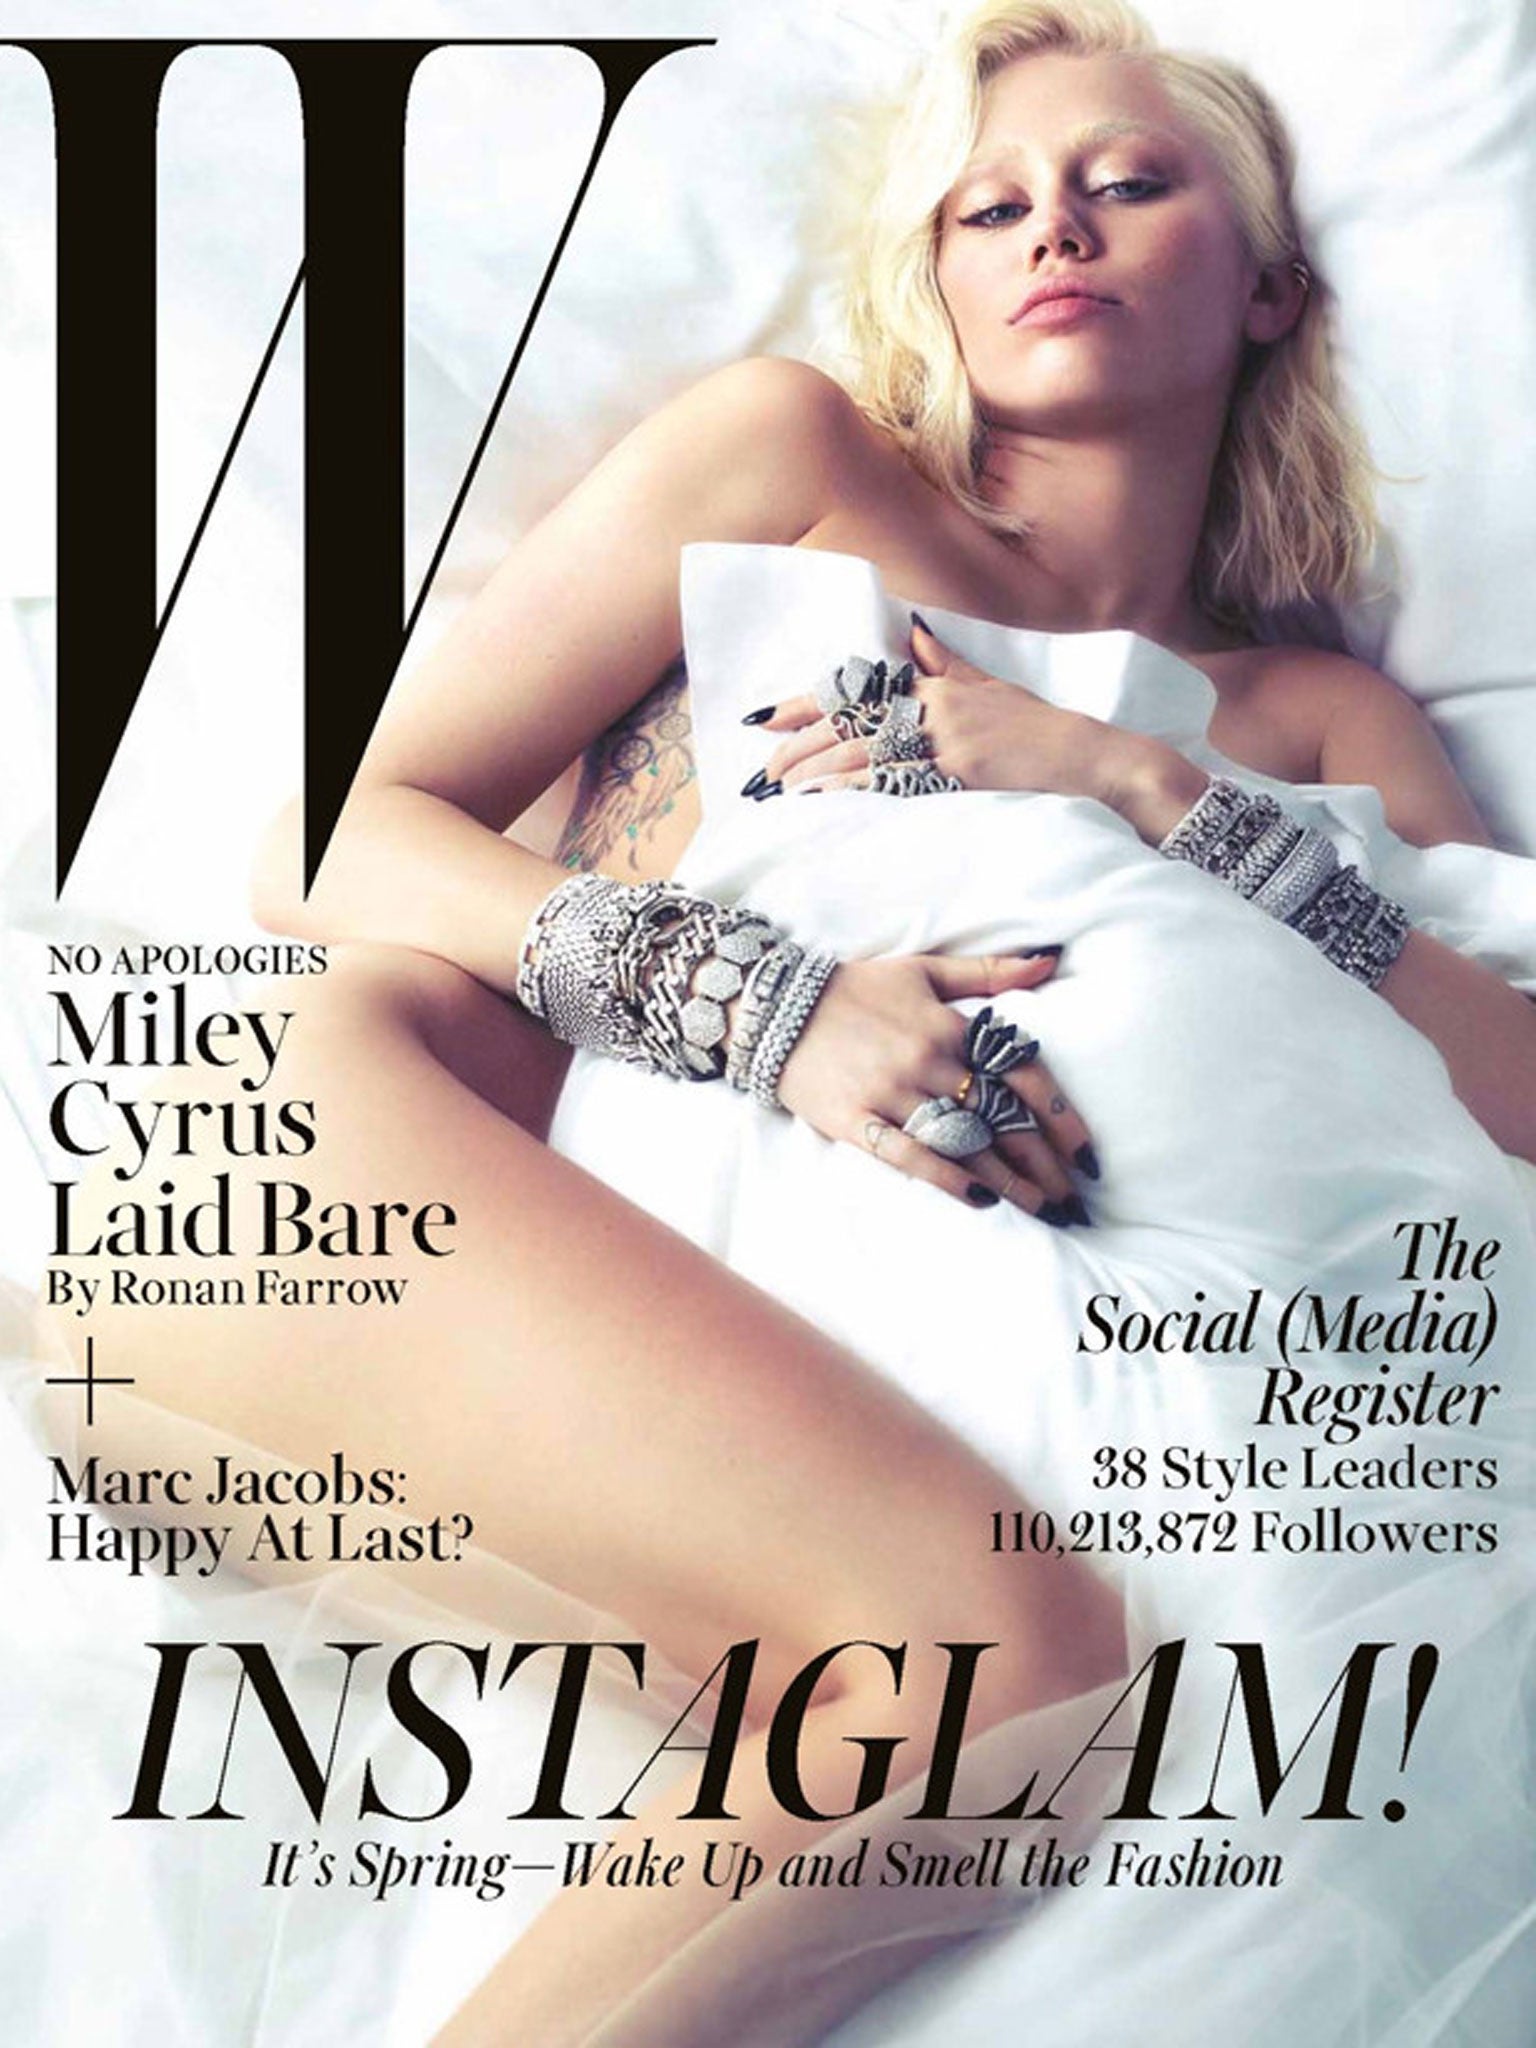 Miley Cyrus poses for W Magazine